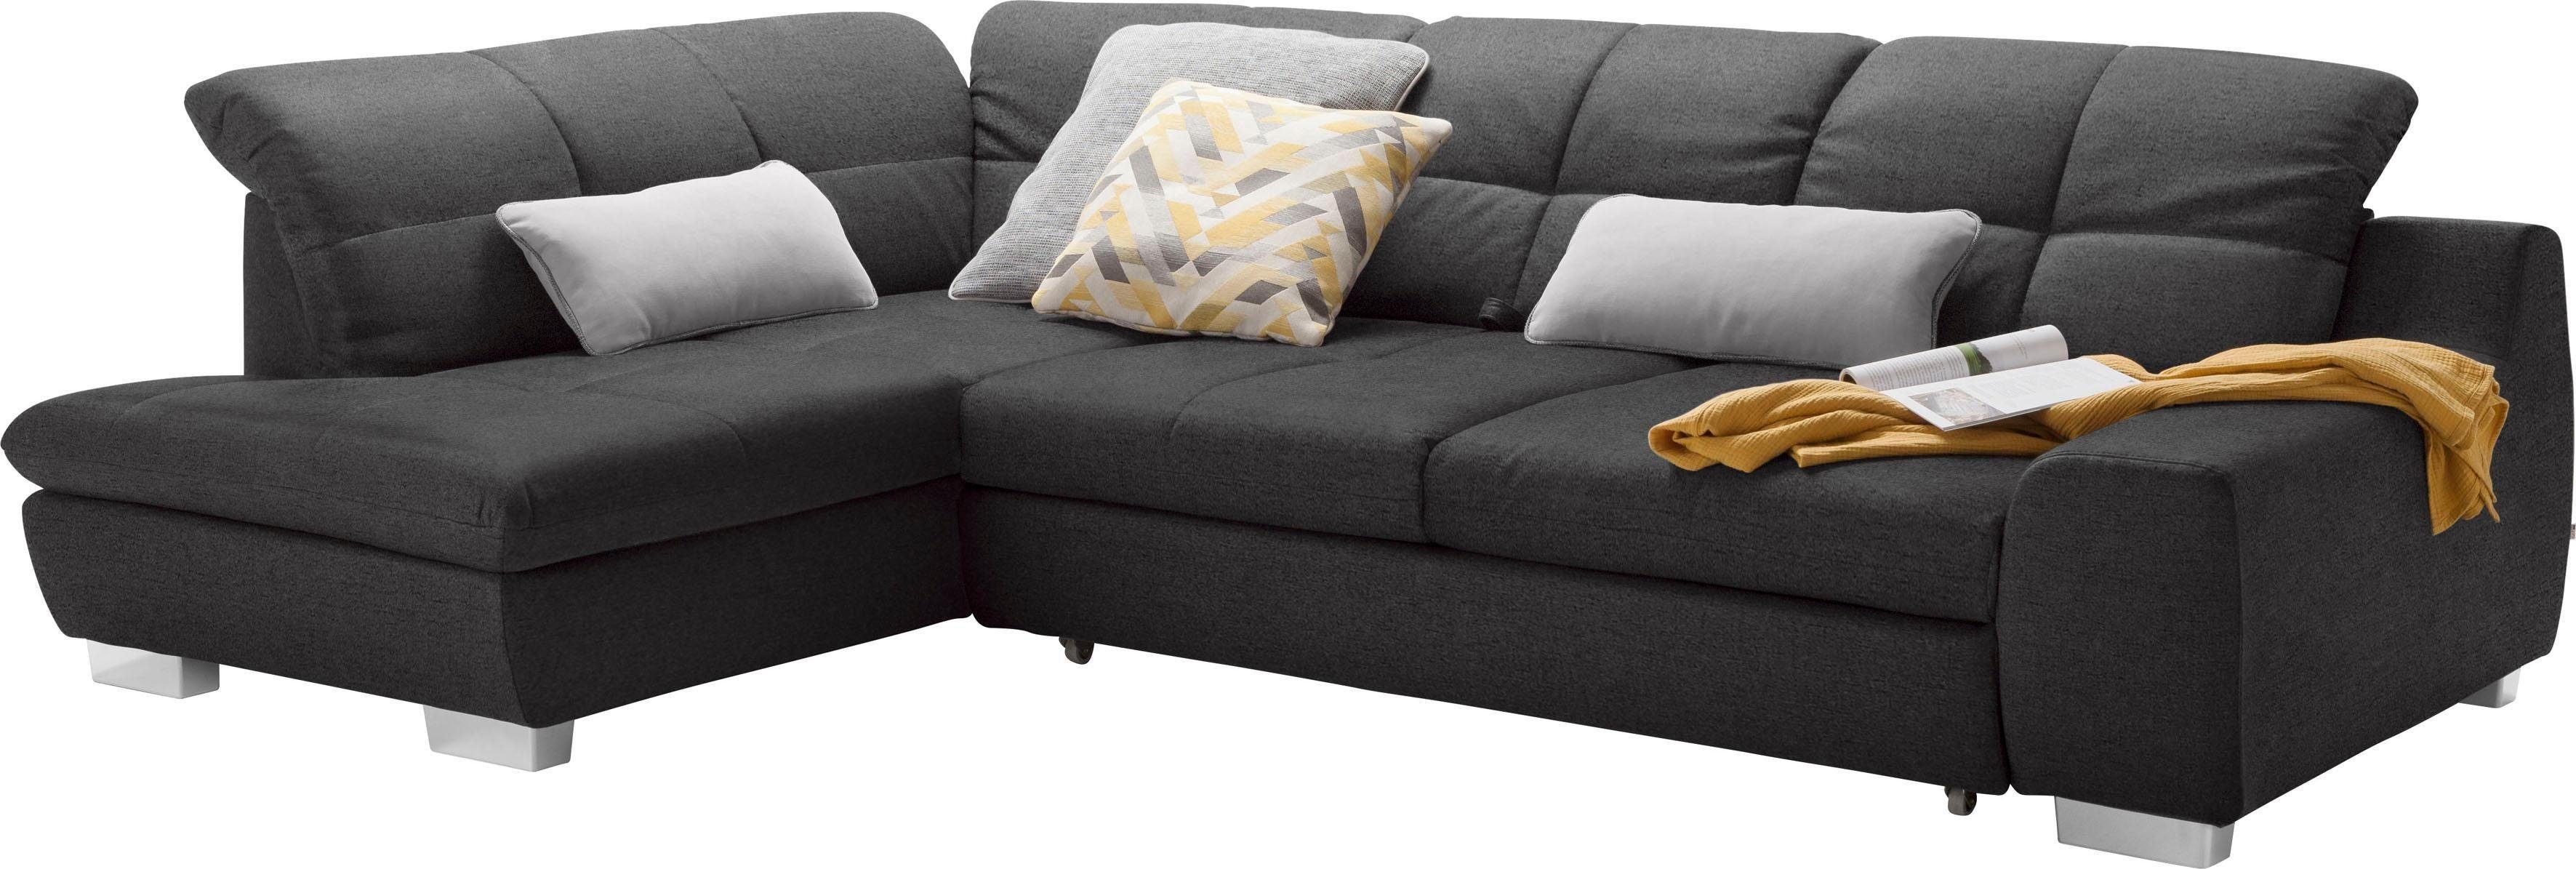 Musterring one Ecksofa 1200, set Bettfunktion by mit wahlweise SO